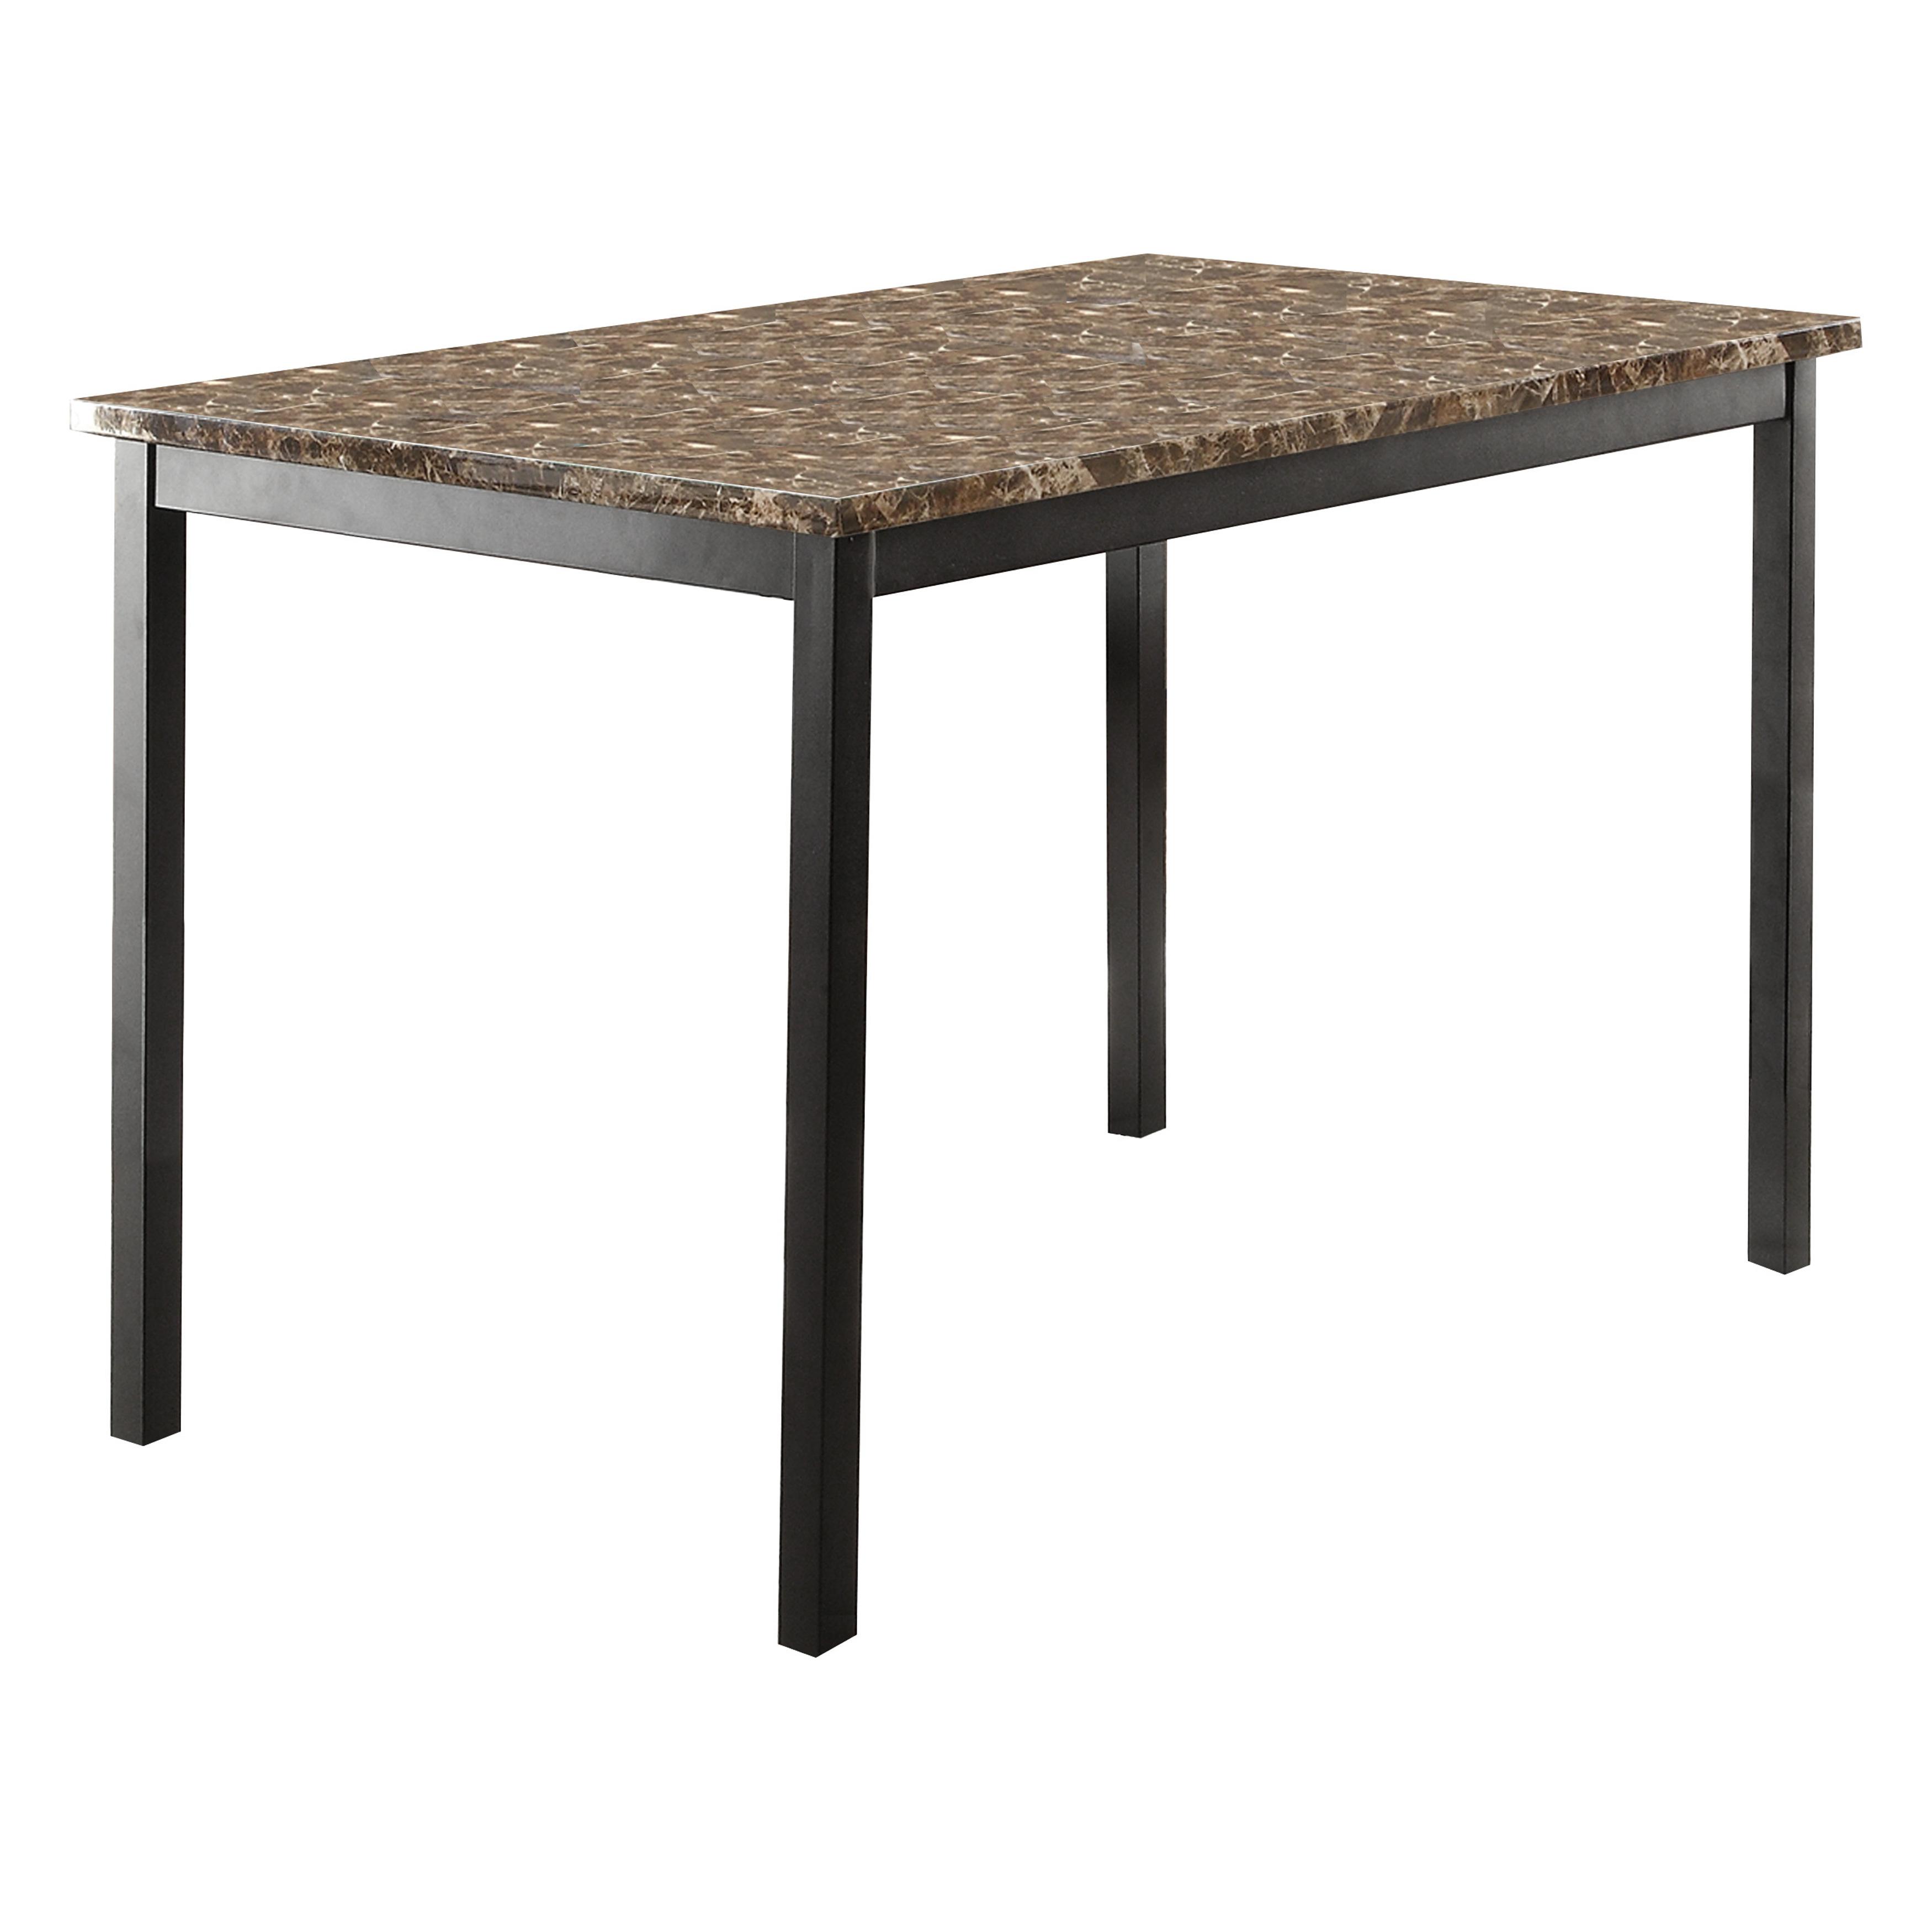 Transitional Dining Table 5038-48 Flannery 5038-48 in Black 